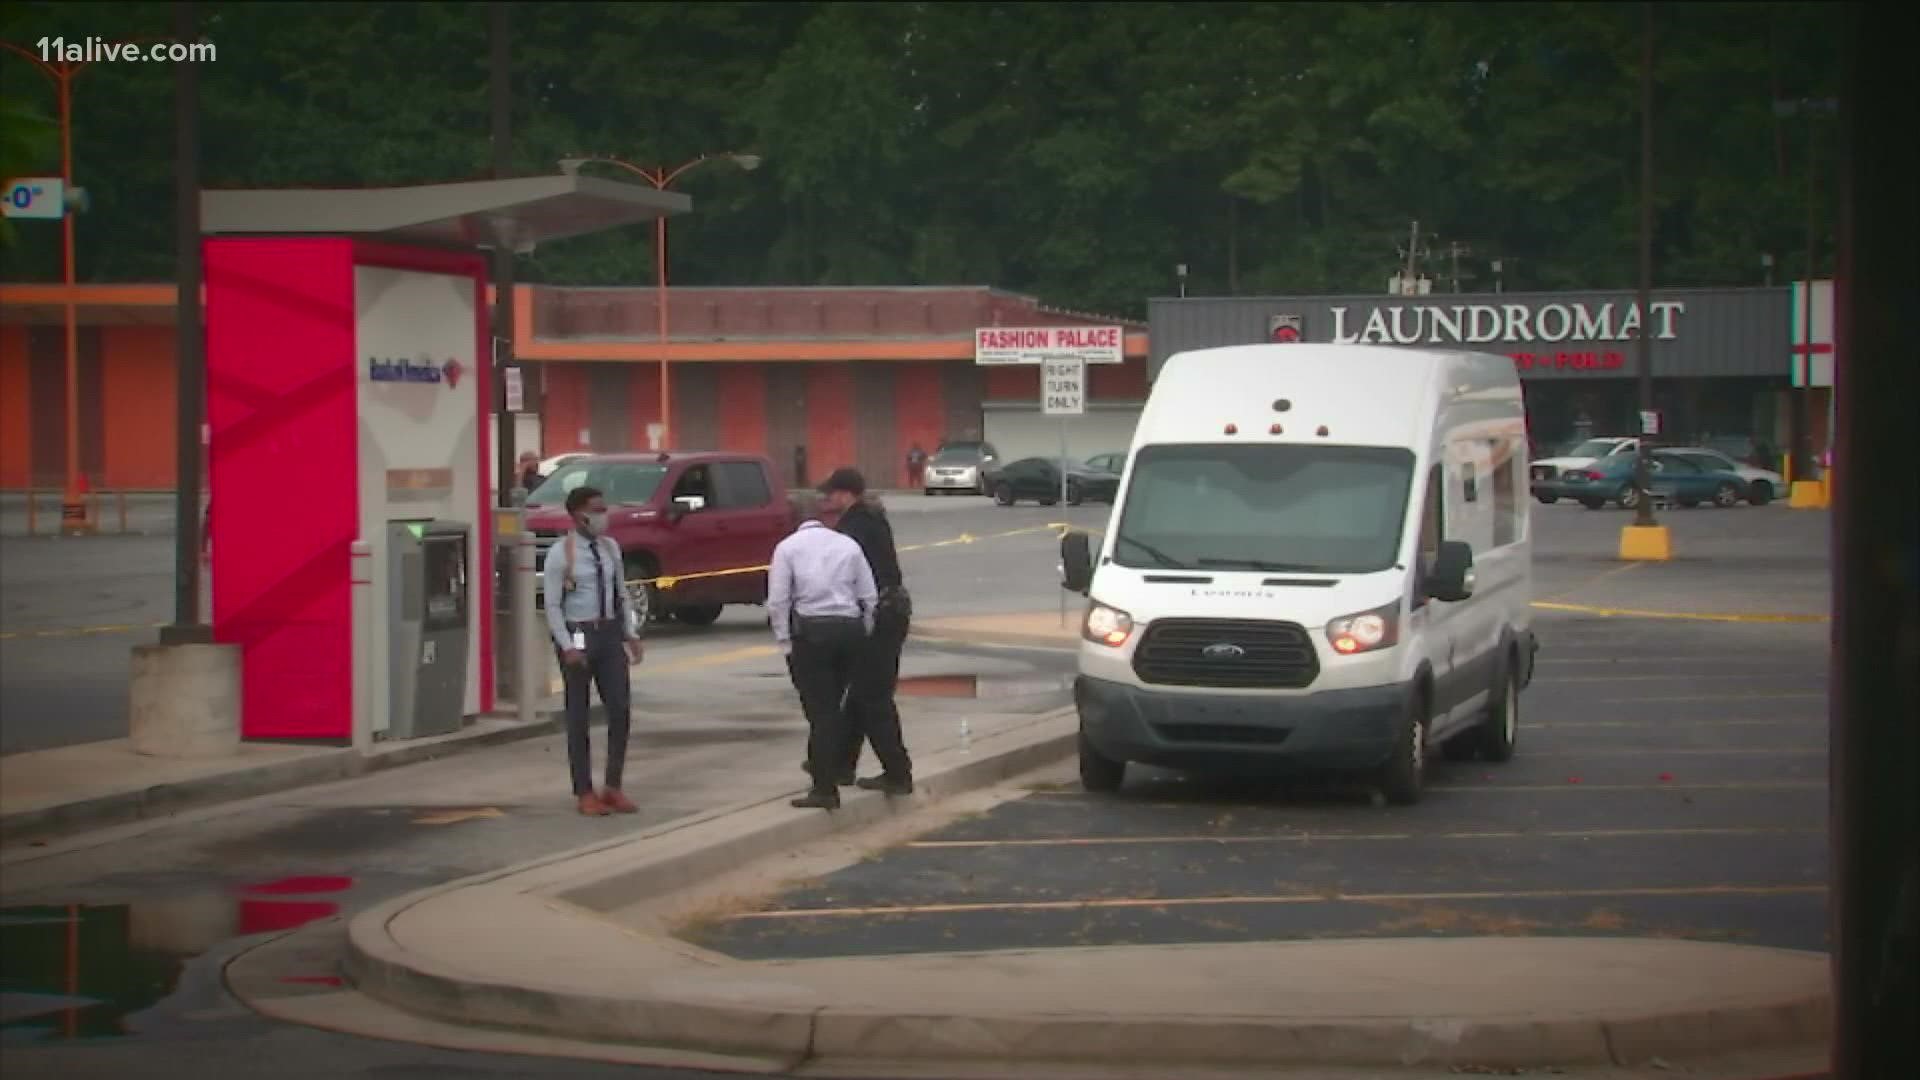 Atlanta Police are investigating after a Loomis security officer was robbed at gunpoint after getting out of an armored vehicle on Metropolitan Pkwy.